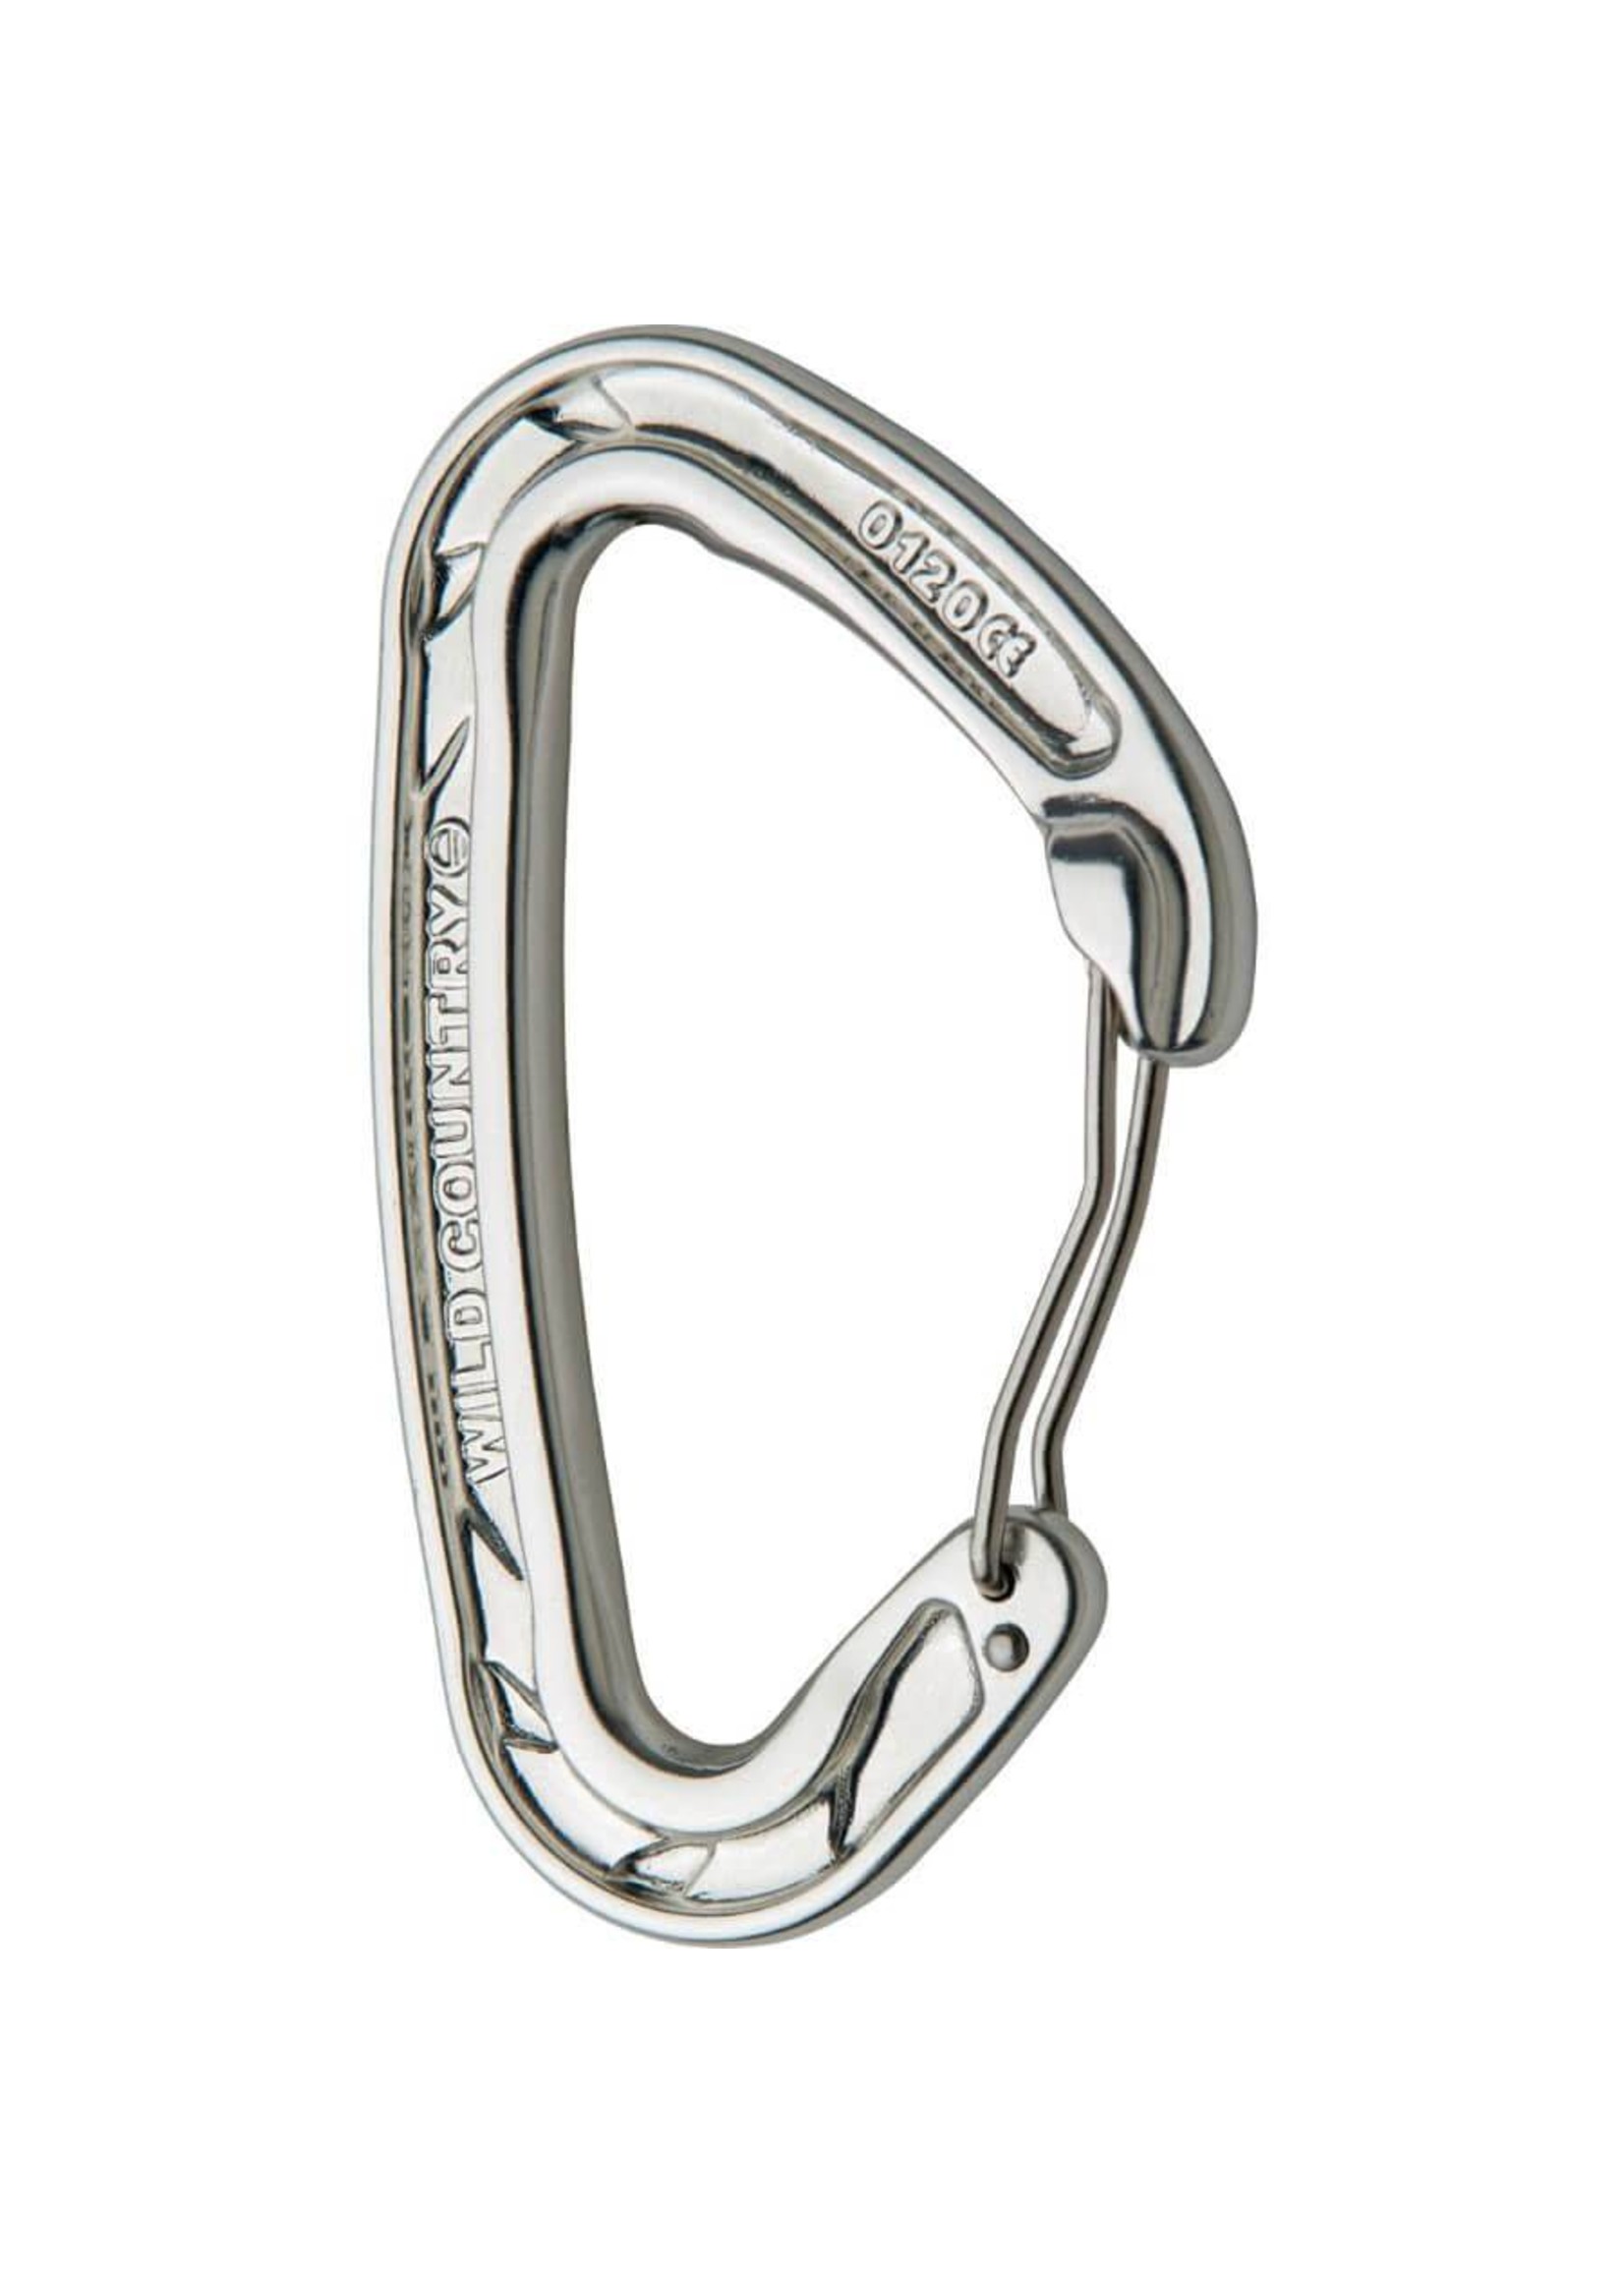 Wild Country Helium Wire Carabiner